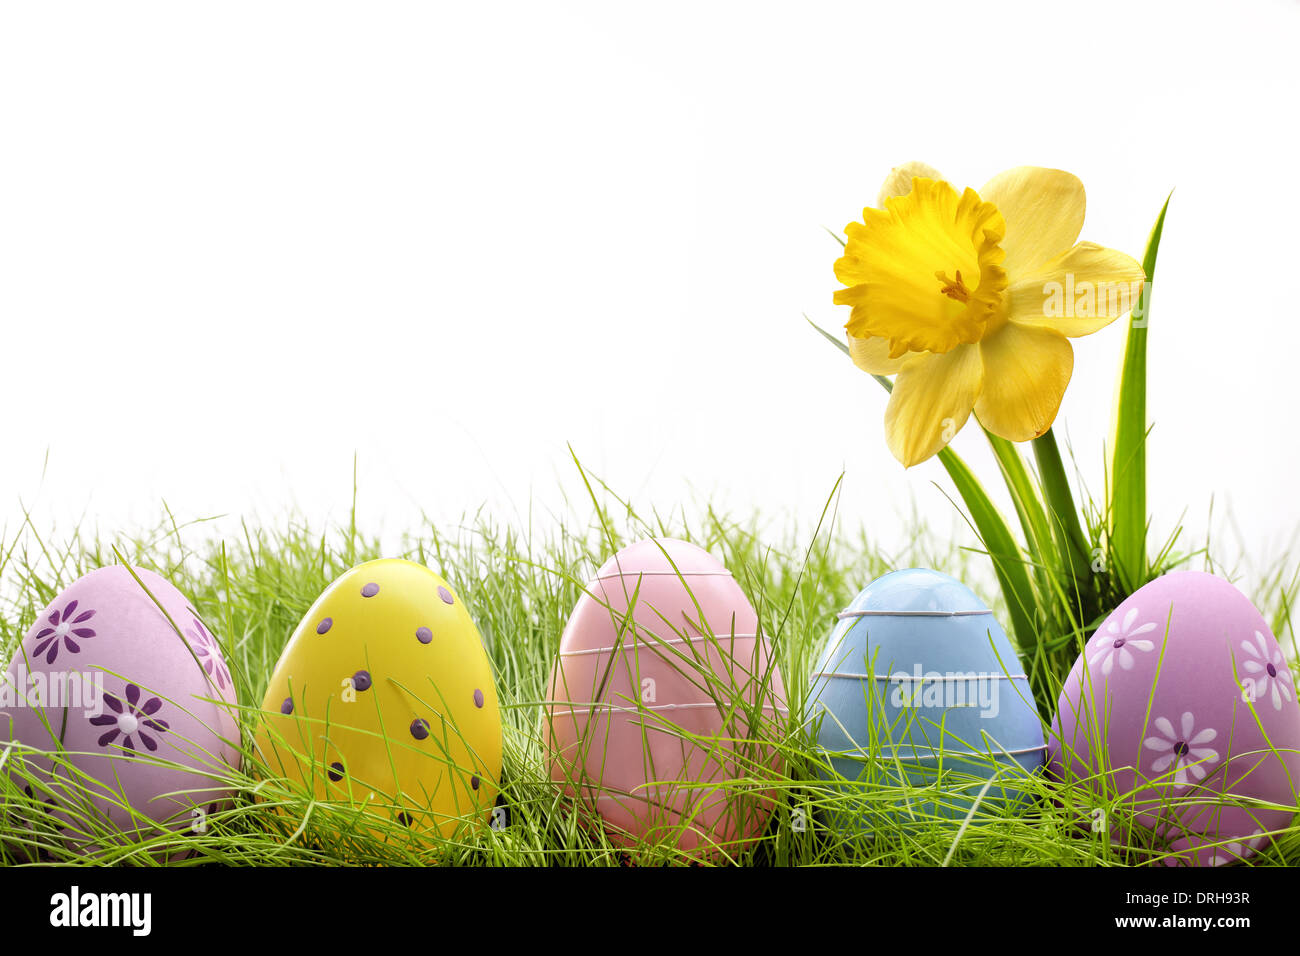 Easter eggs hiding in the grass with daffodil flower Stock Photo